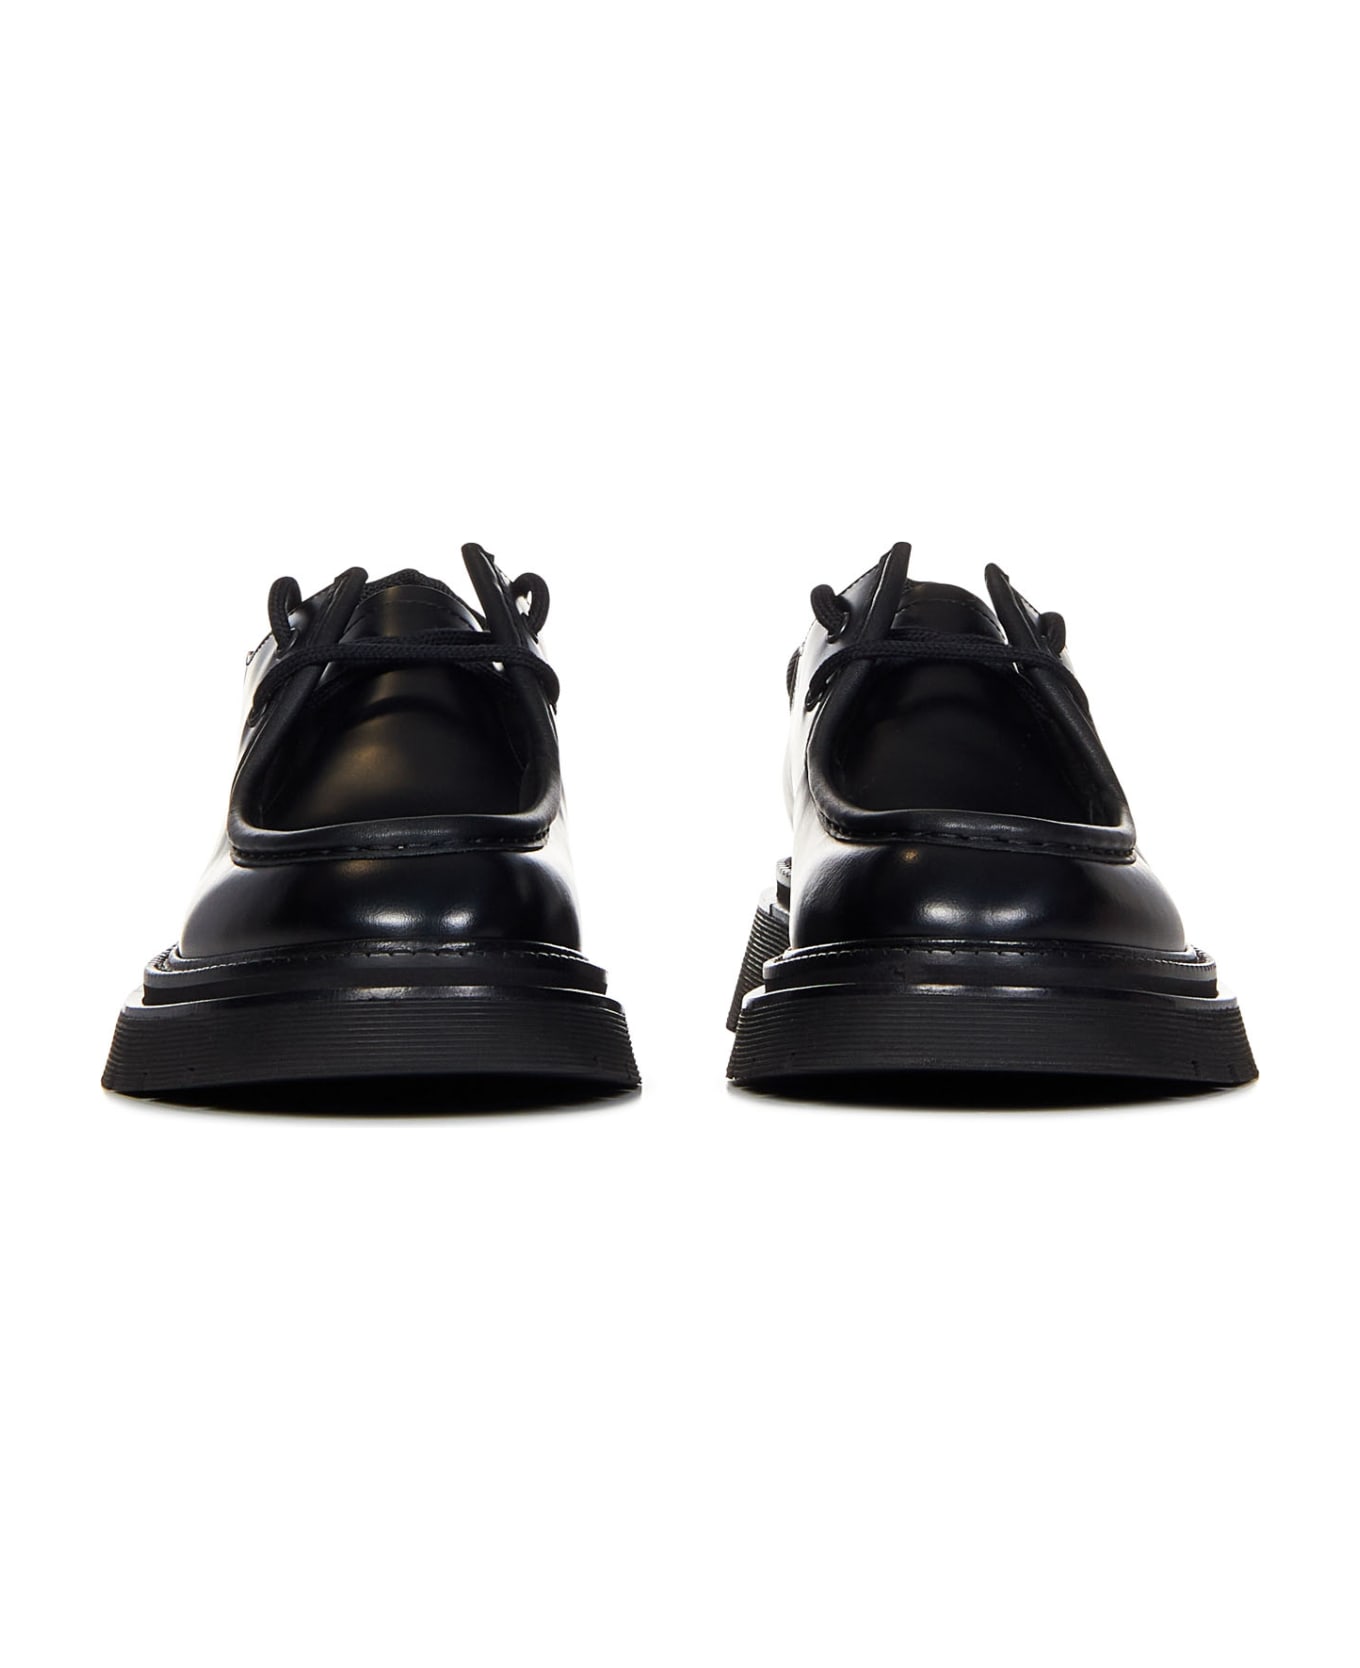 Dsquared2 Laced Up Shoes - Black ローファー＆デッキシューズ